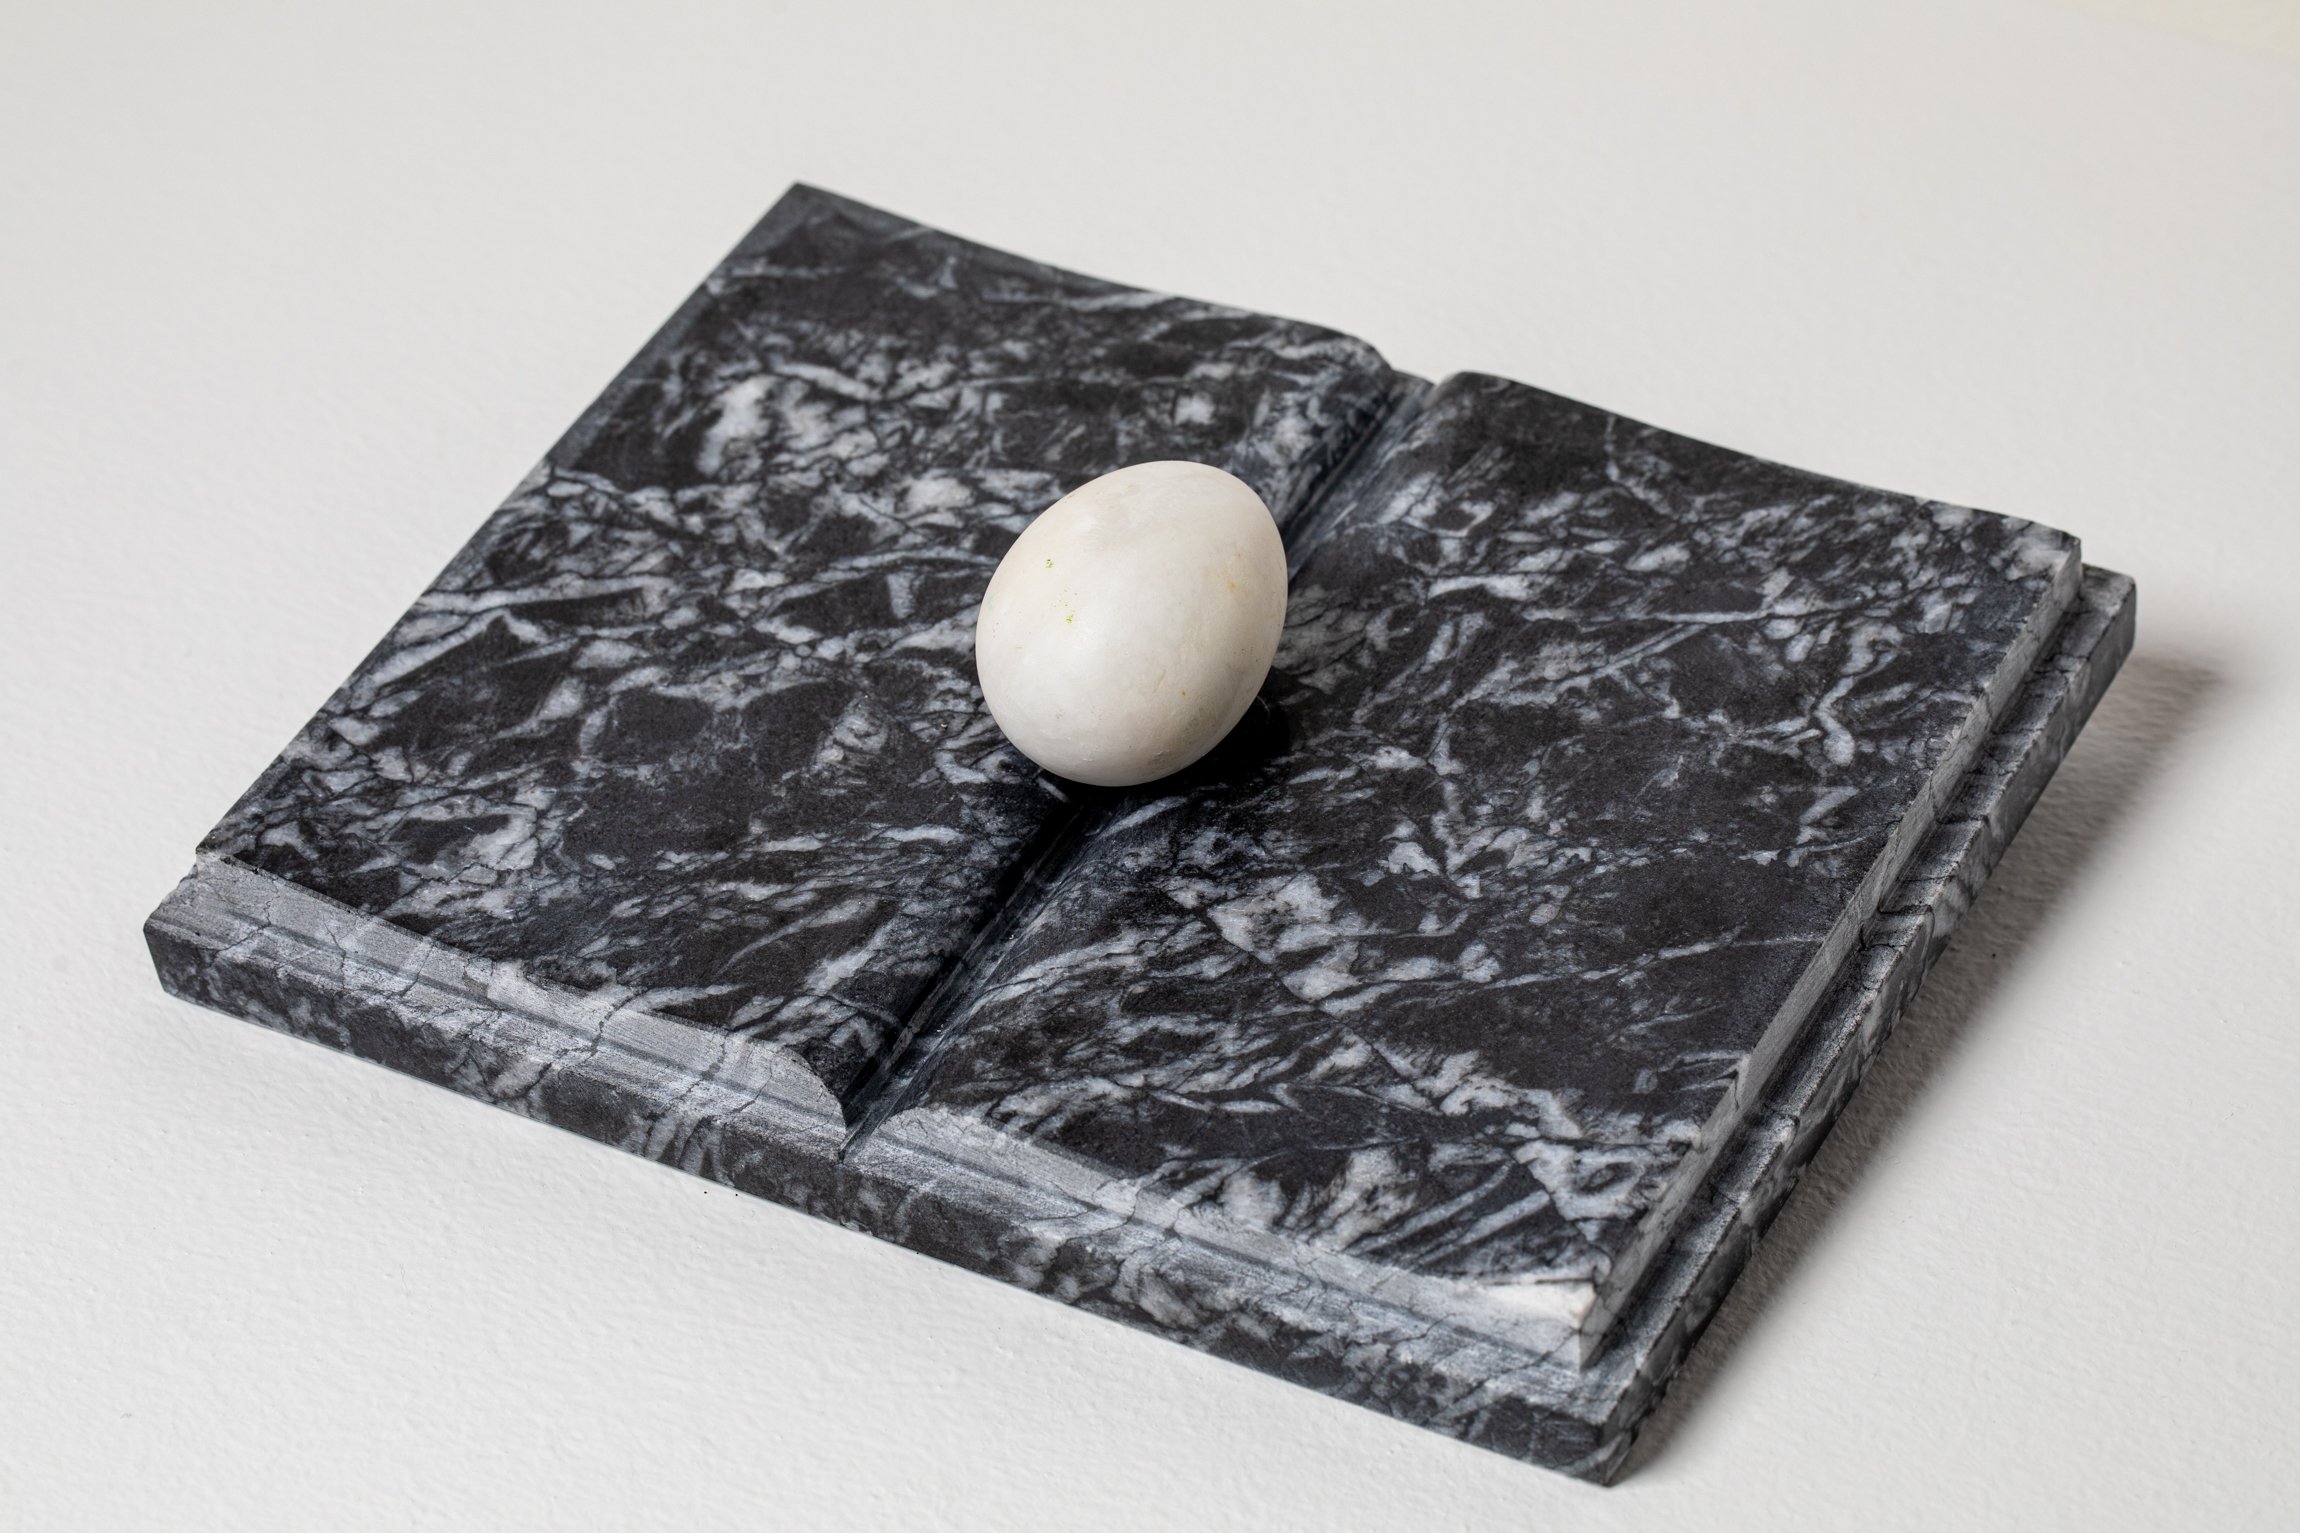 Untitled (book with egg), 1983
marble